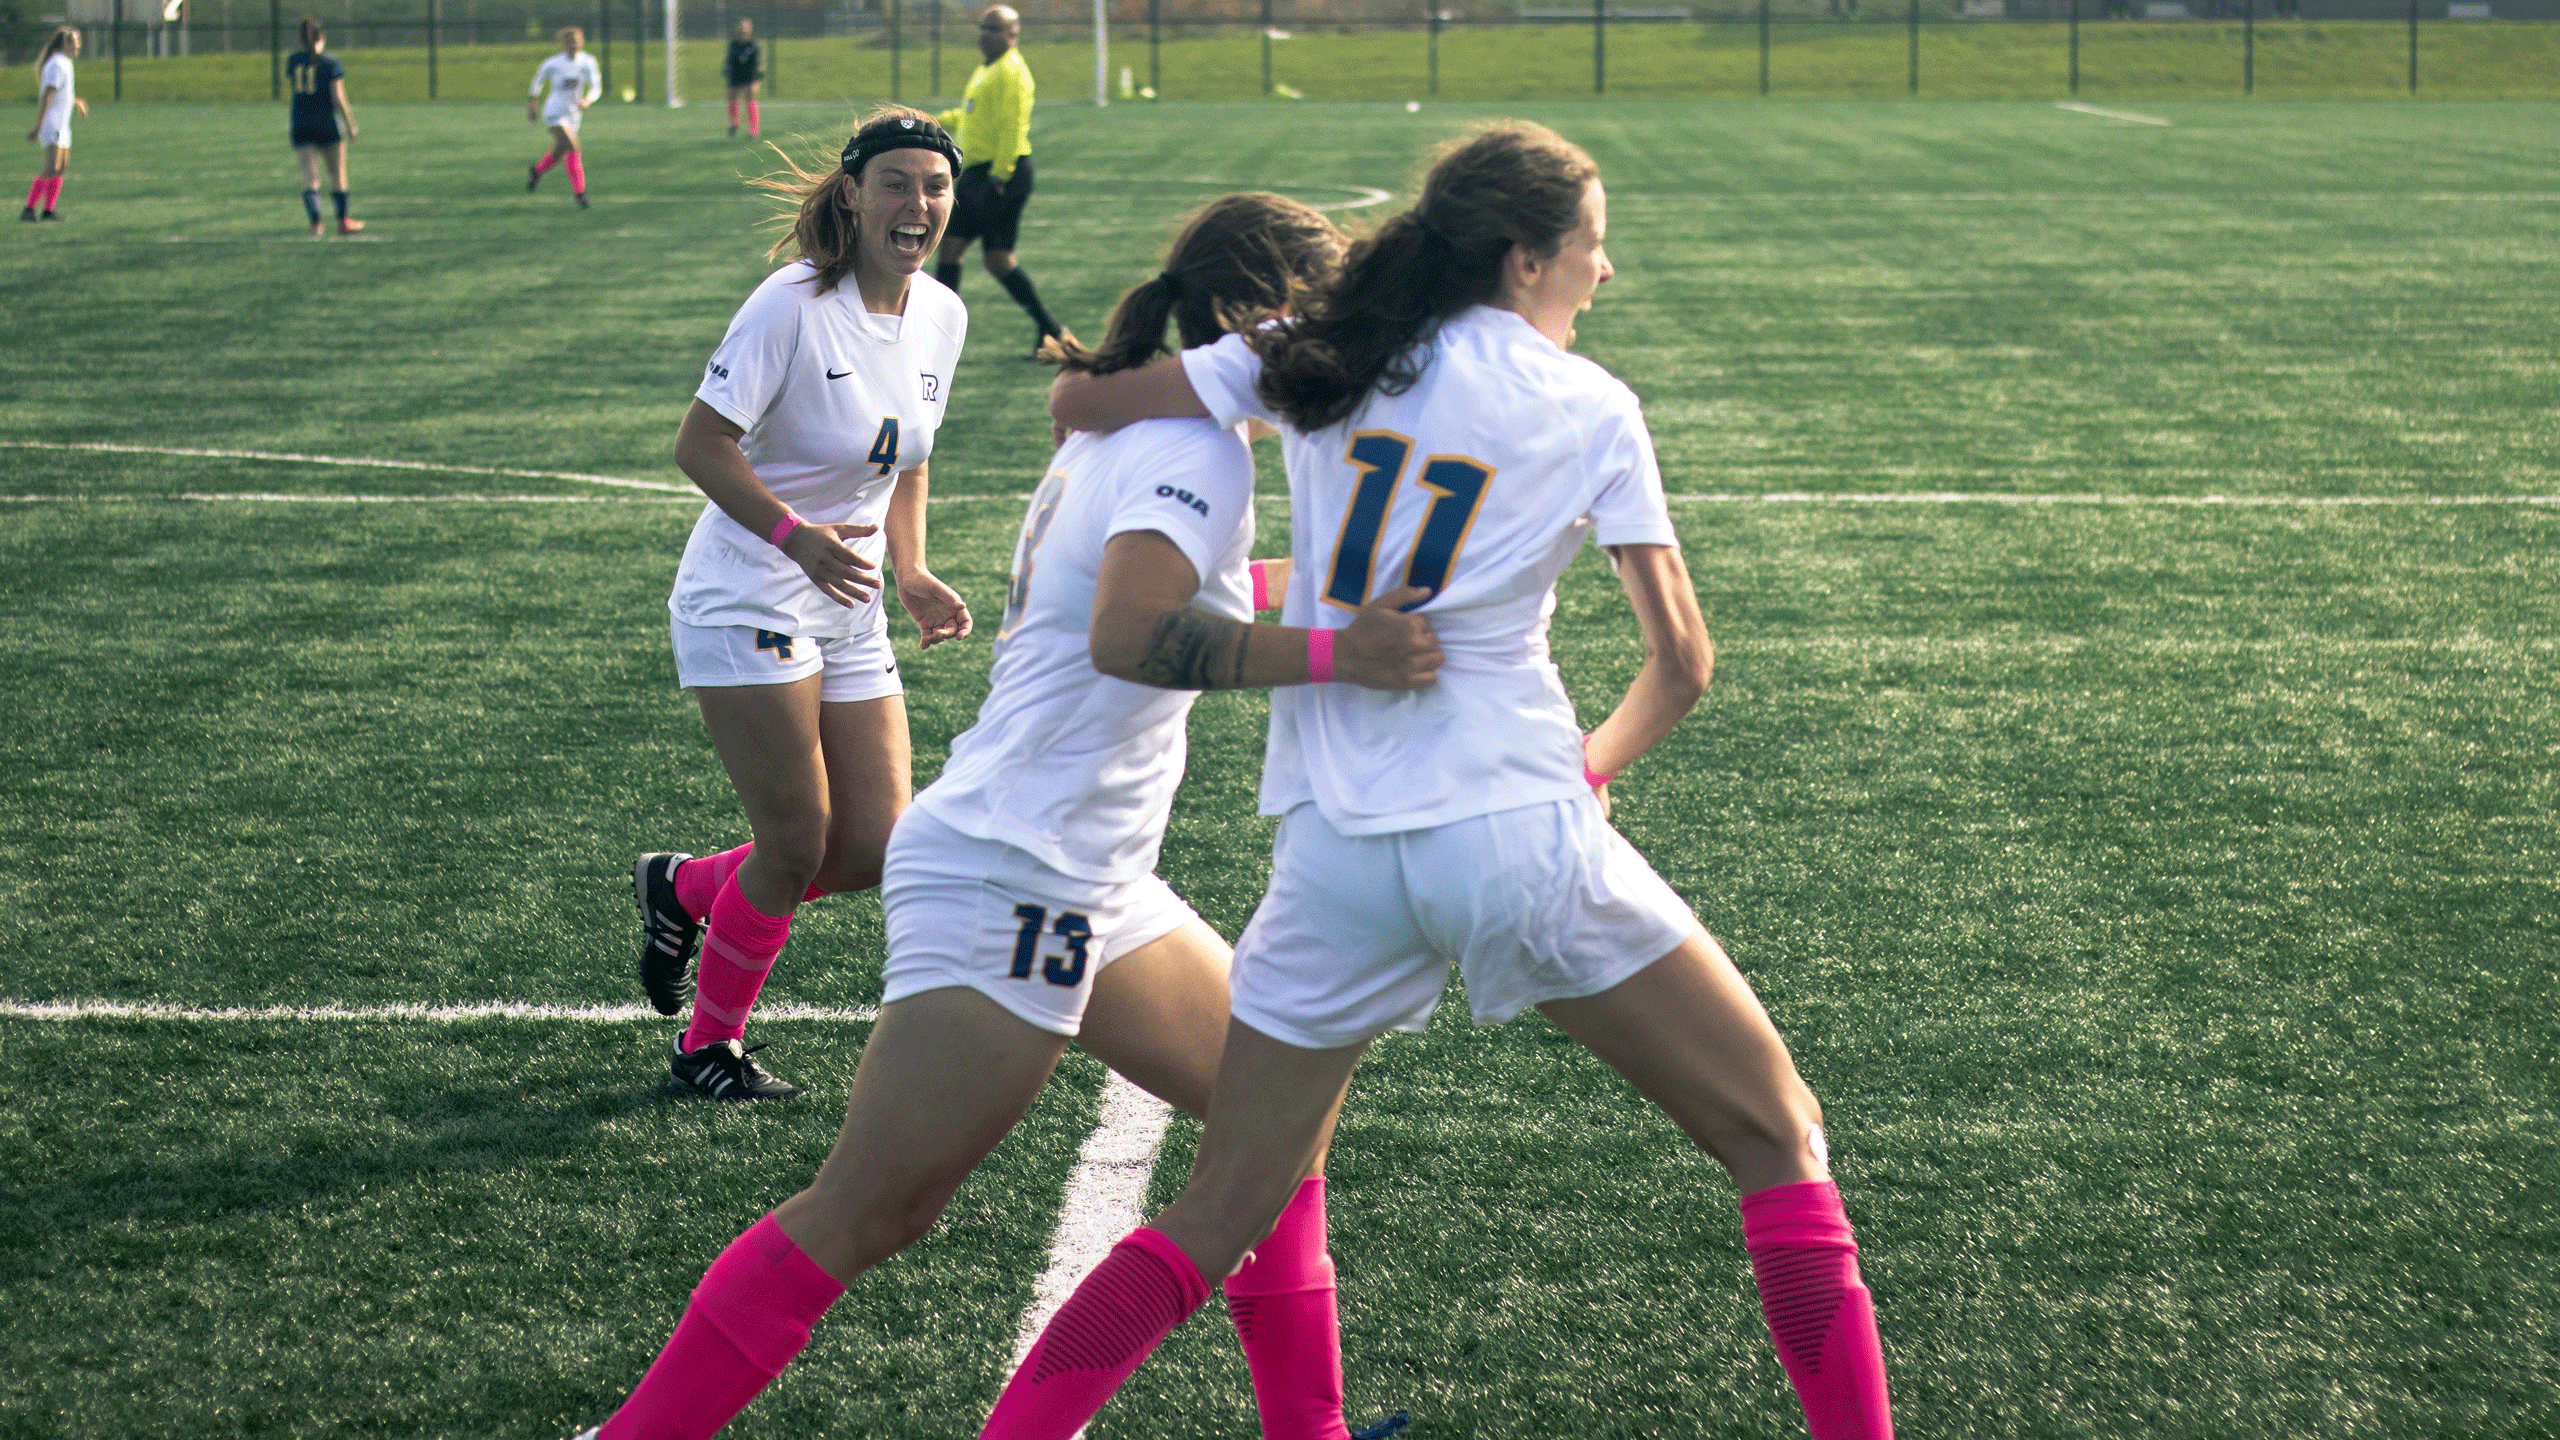 The Rams women's soccer team in white jerseys and pink socks celebrate after scoring a goal